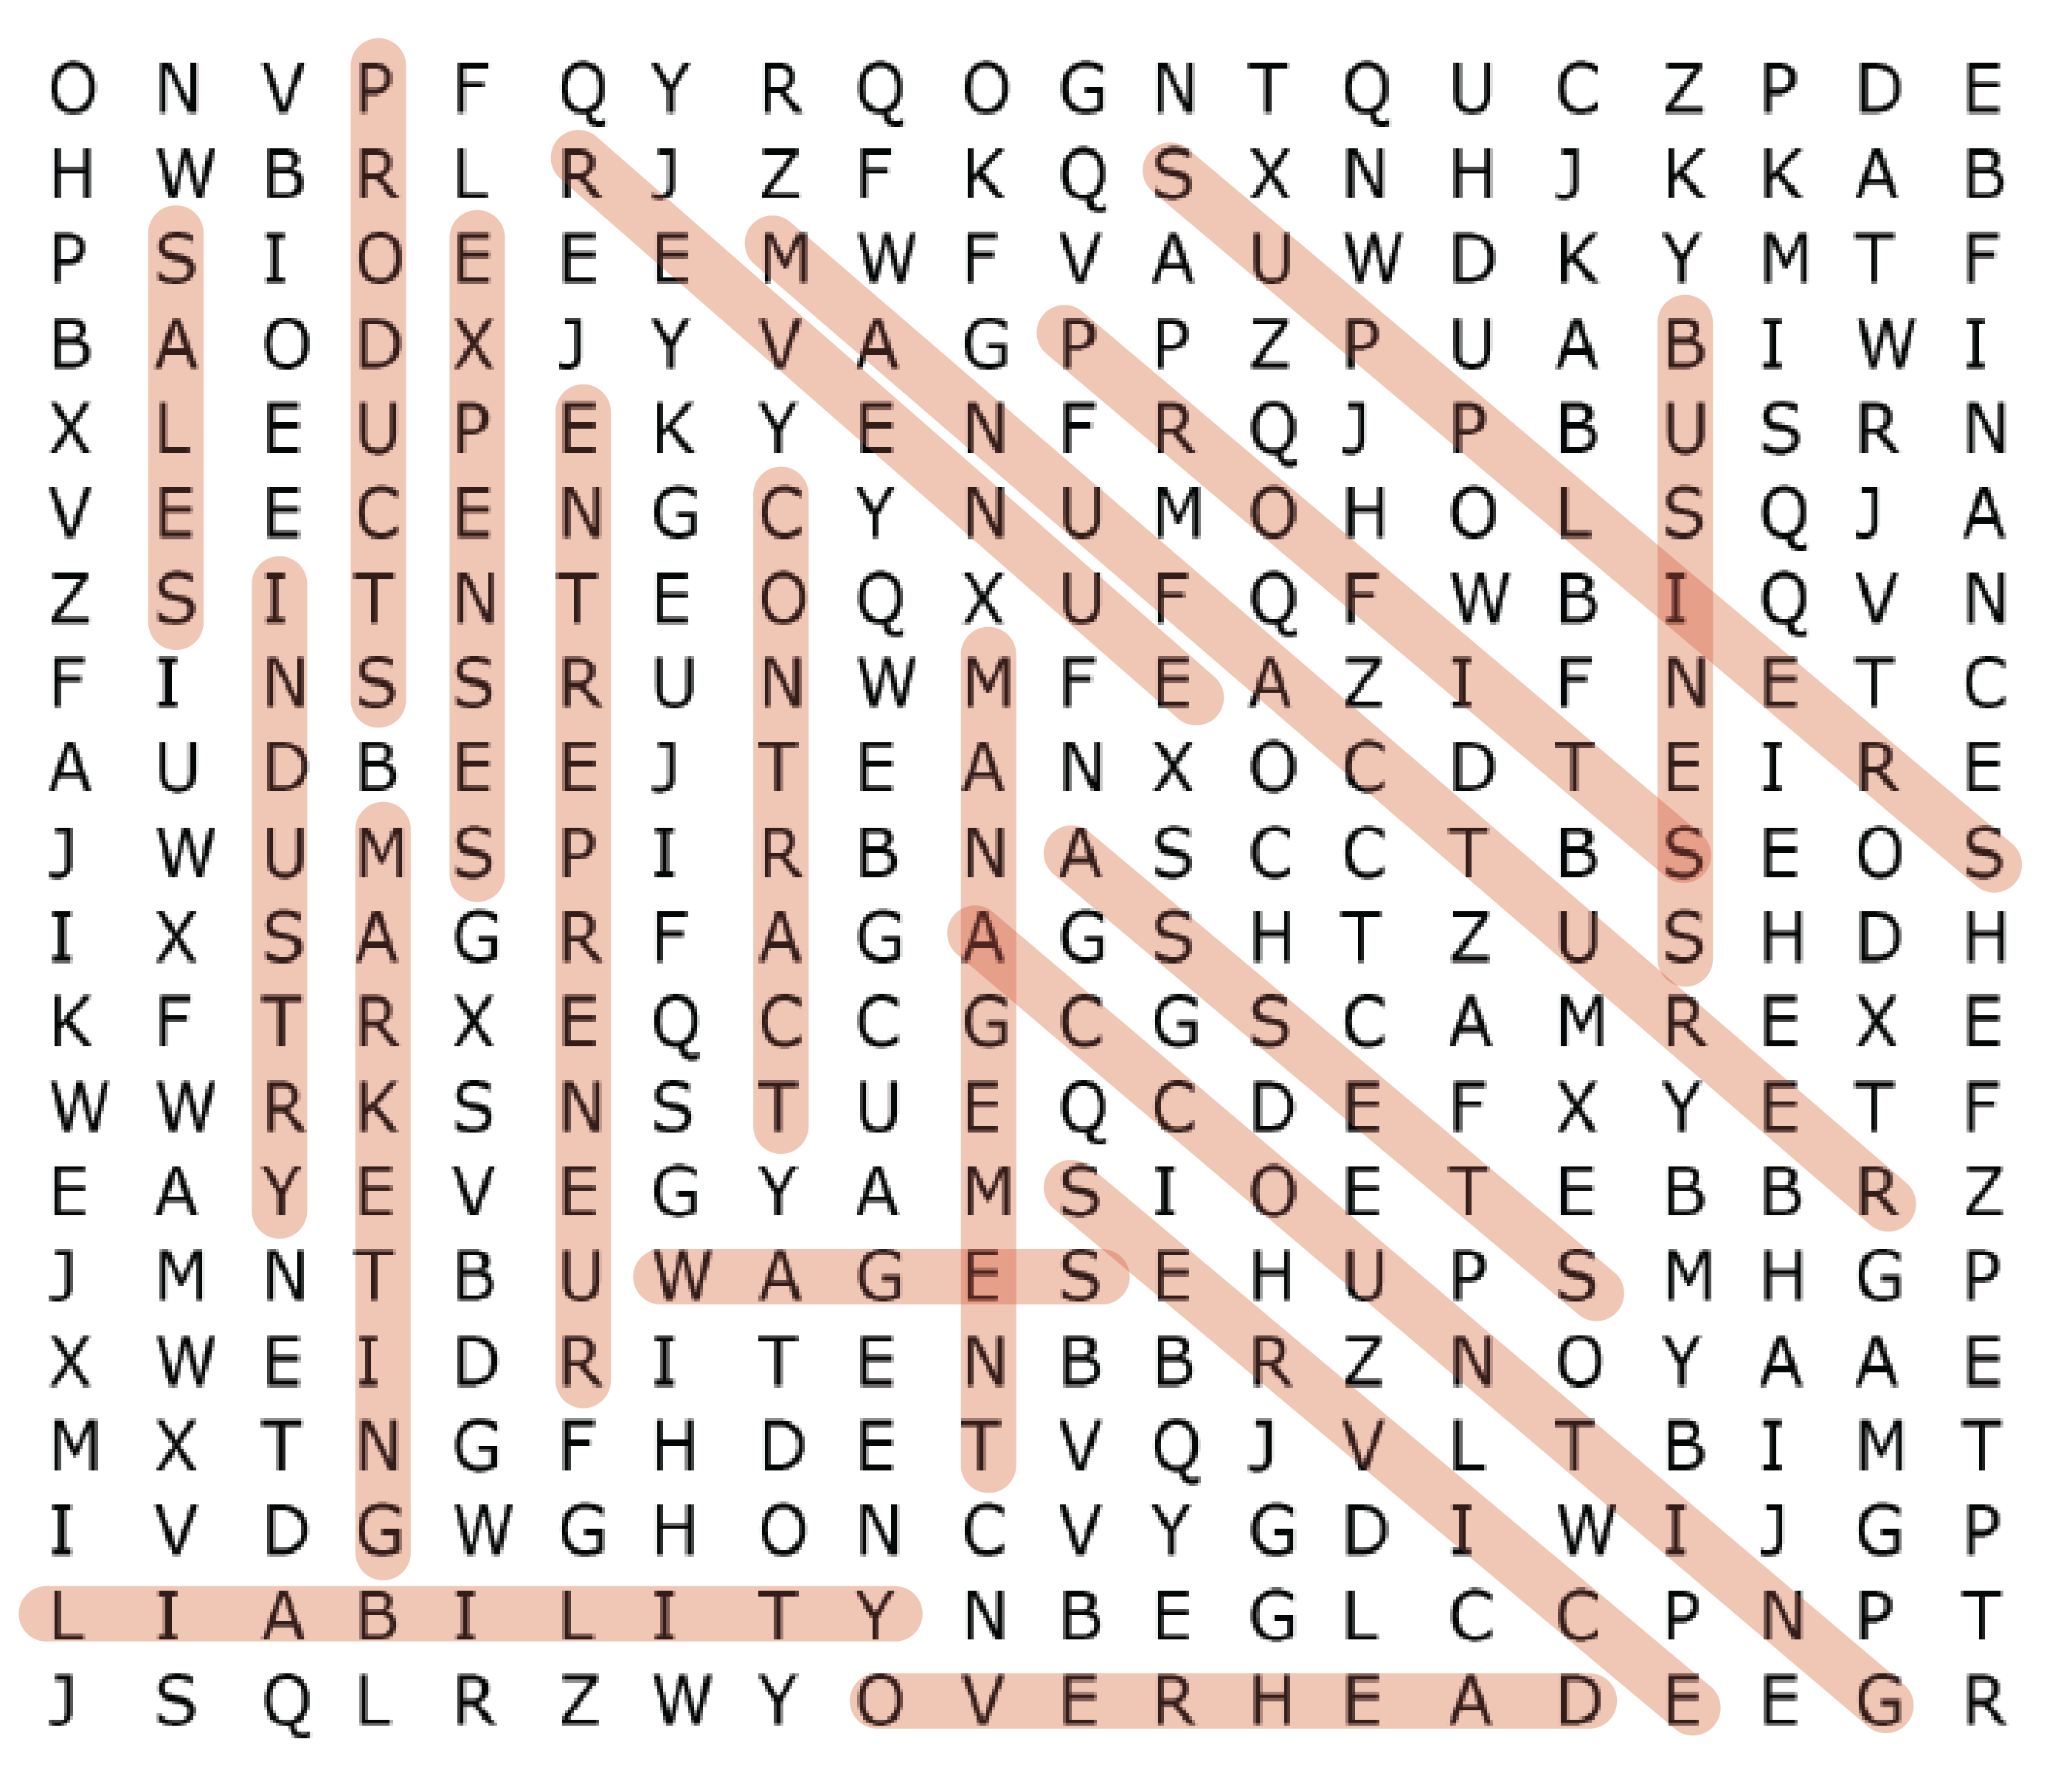 Solution for Issue #2 Word Search Puzzle